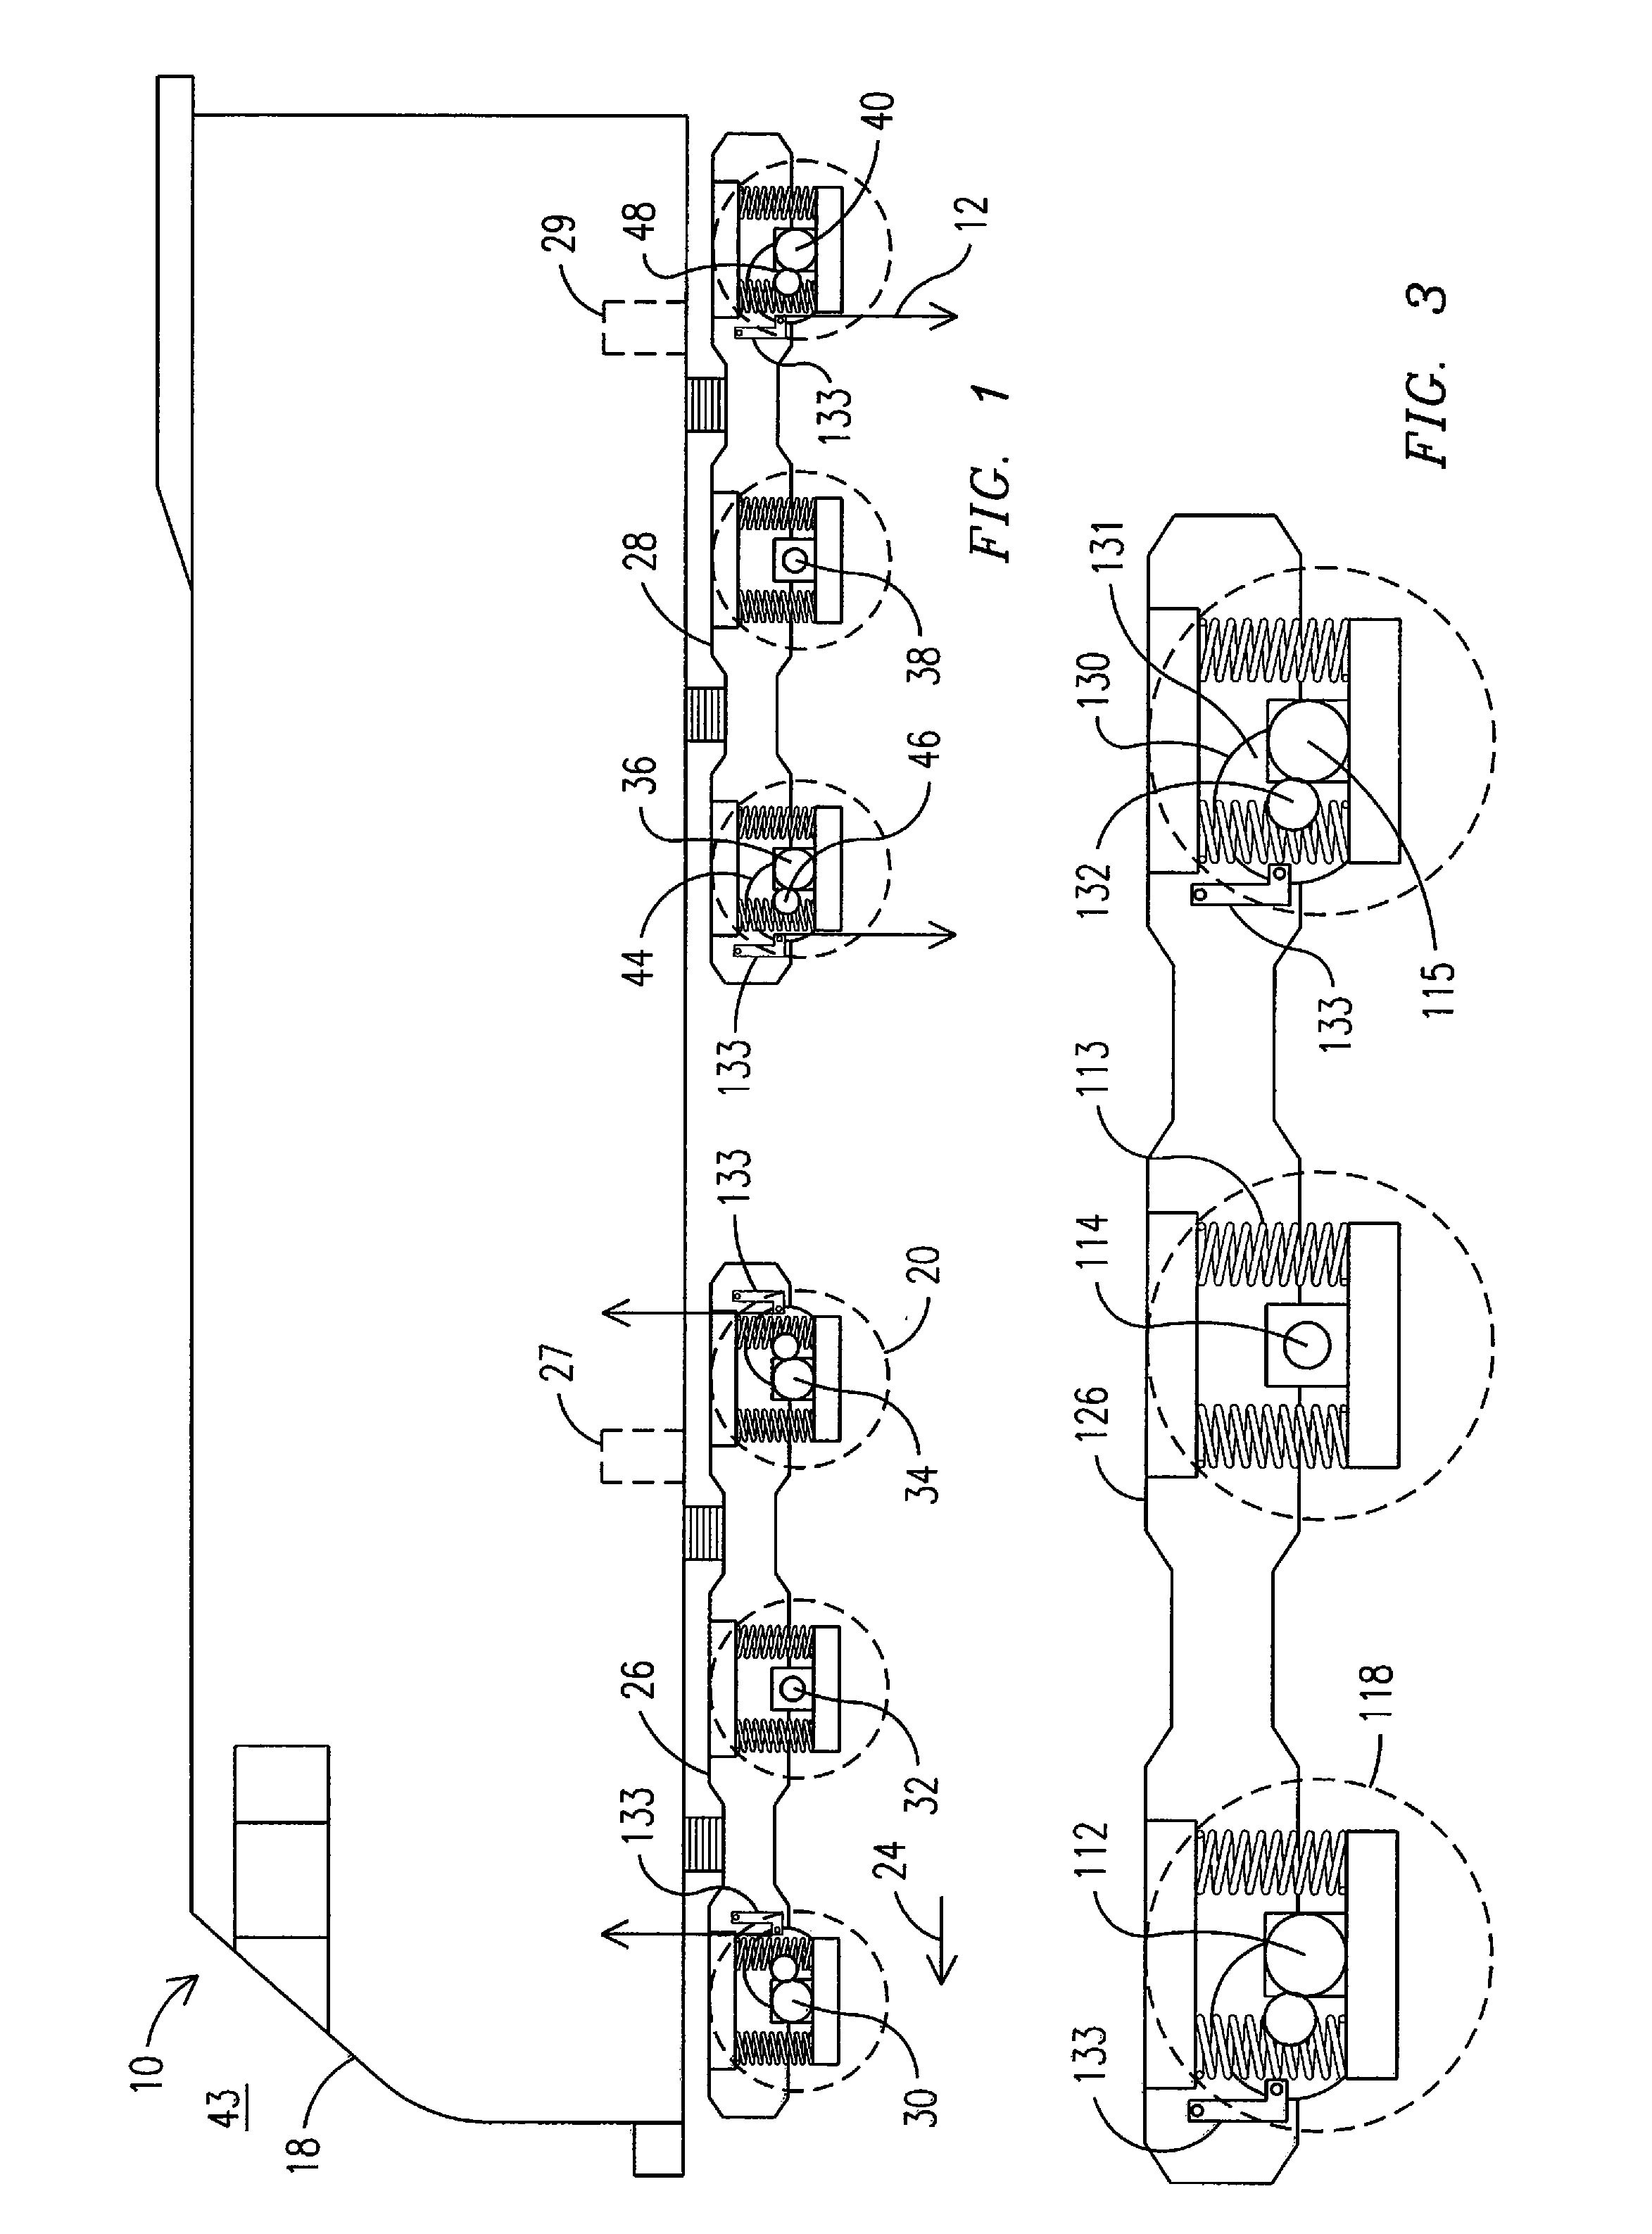 System and method for dynamically determining a force applied through a rail vehicle axle